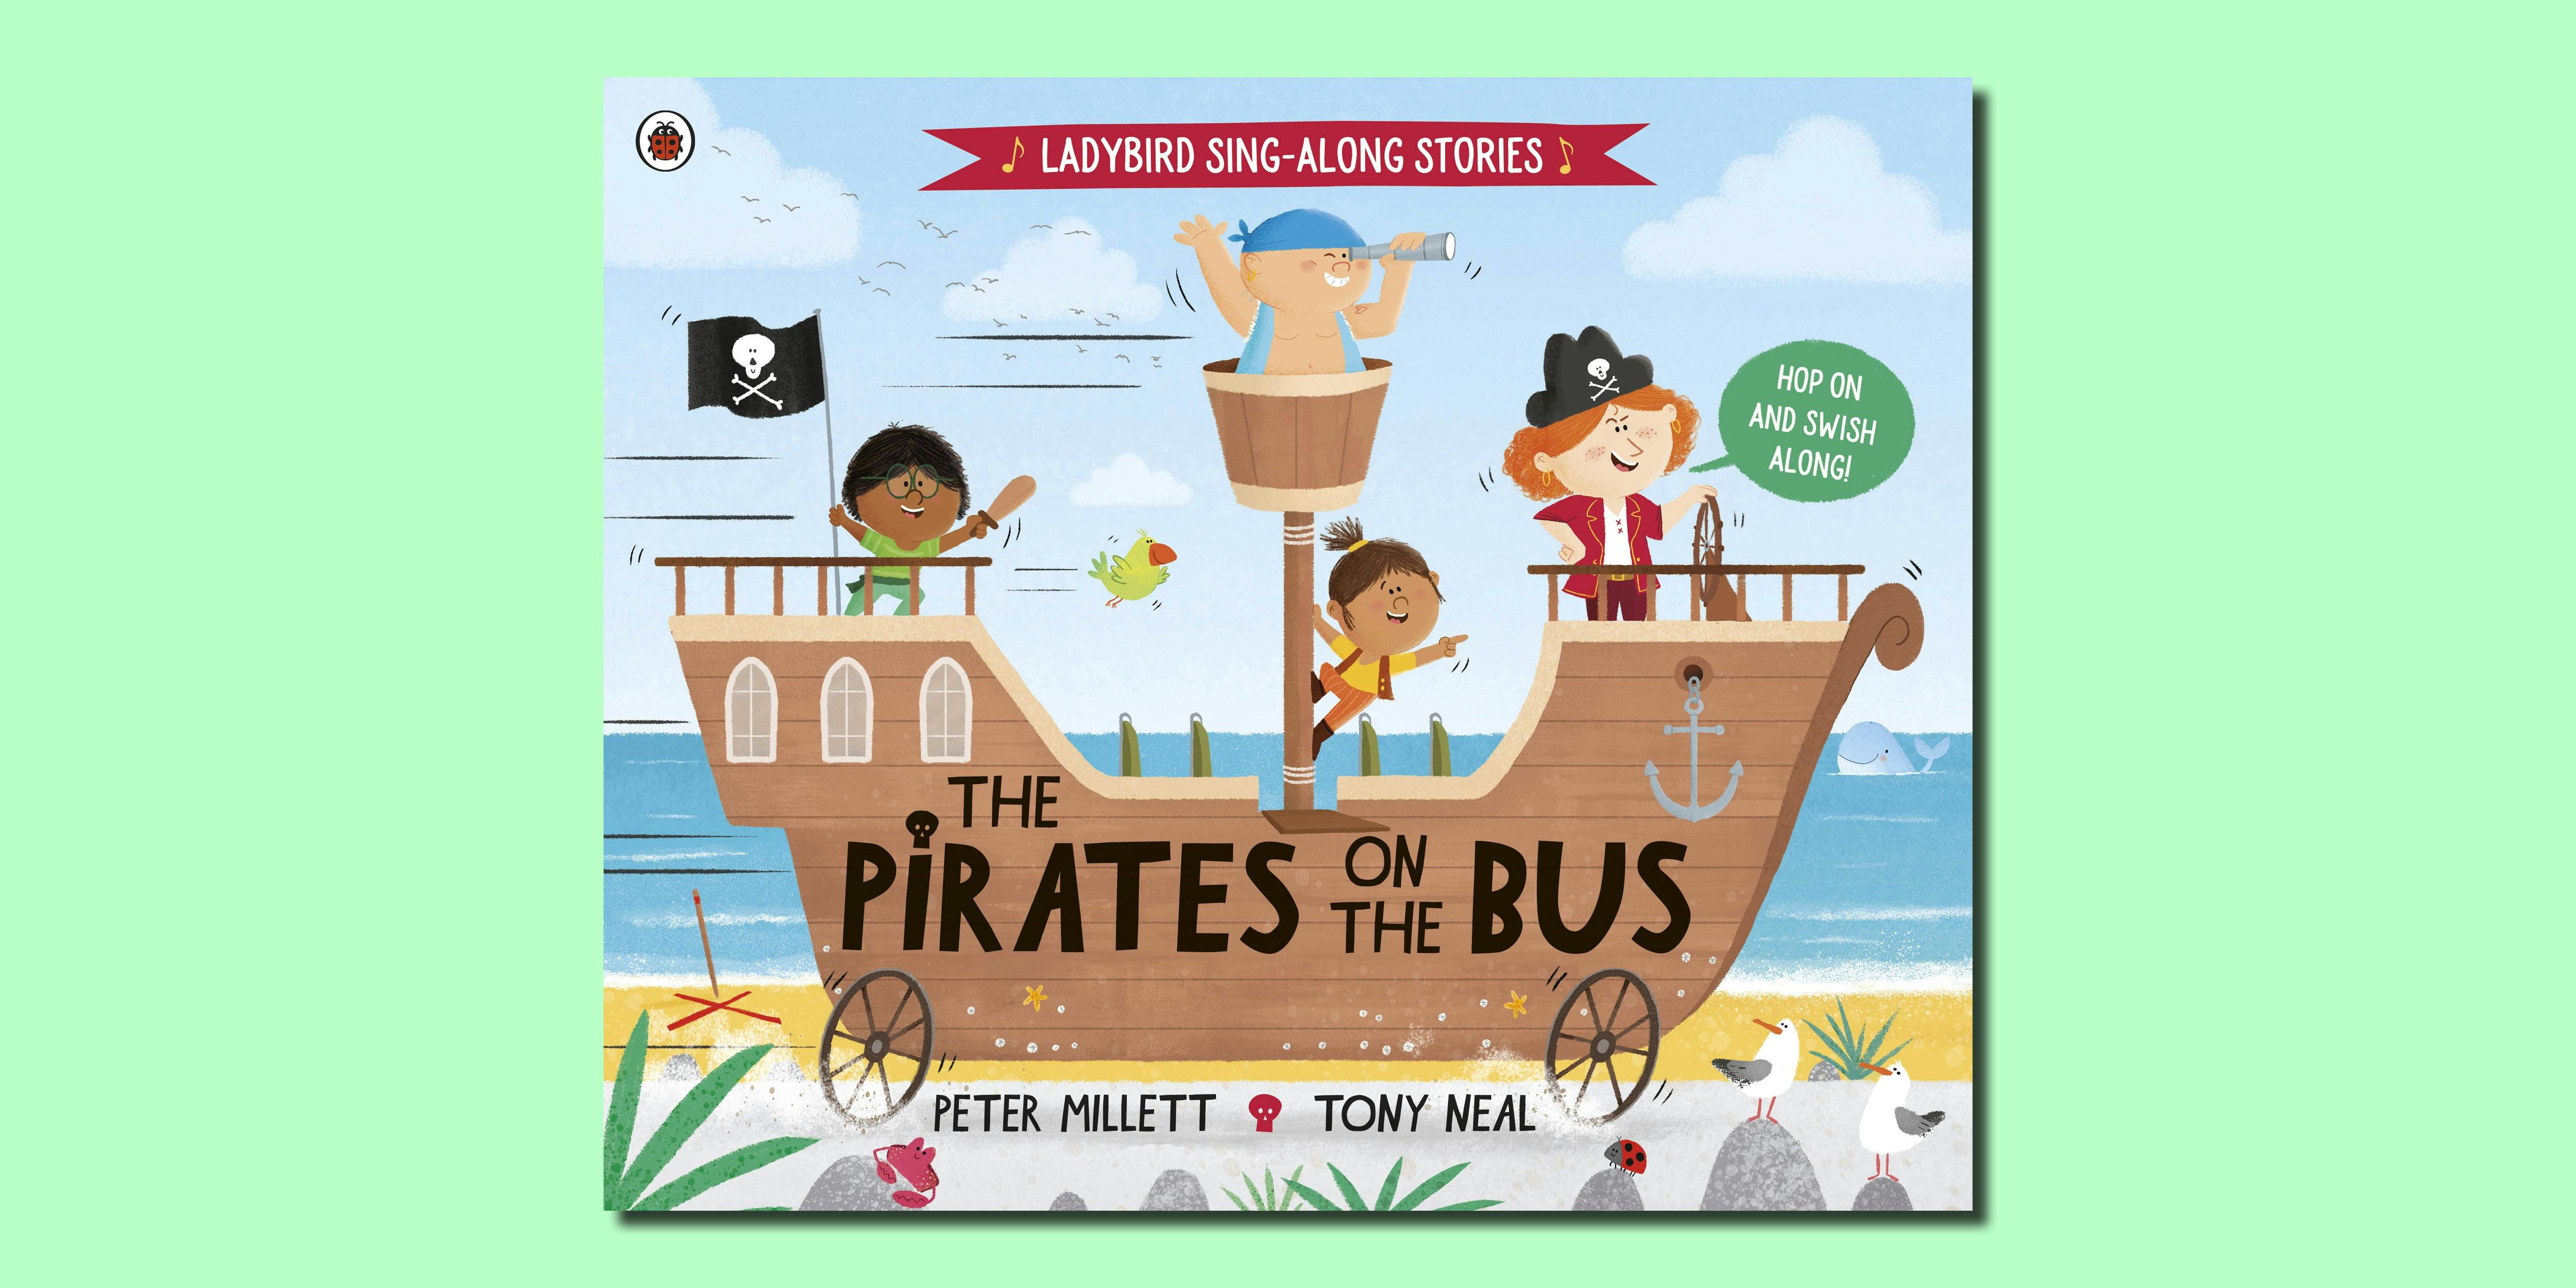 Make your own pirate hat with The Pirates on the Bus